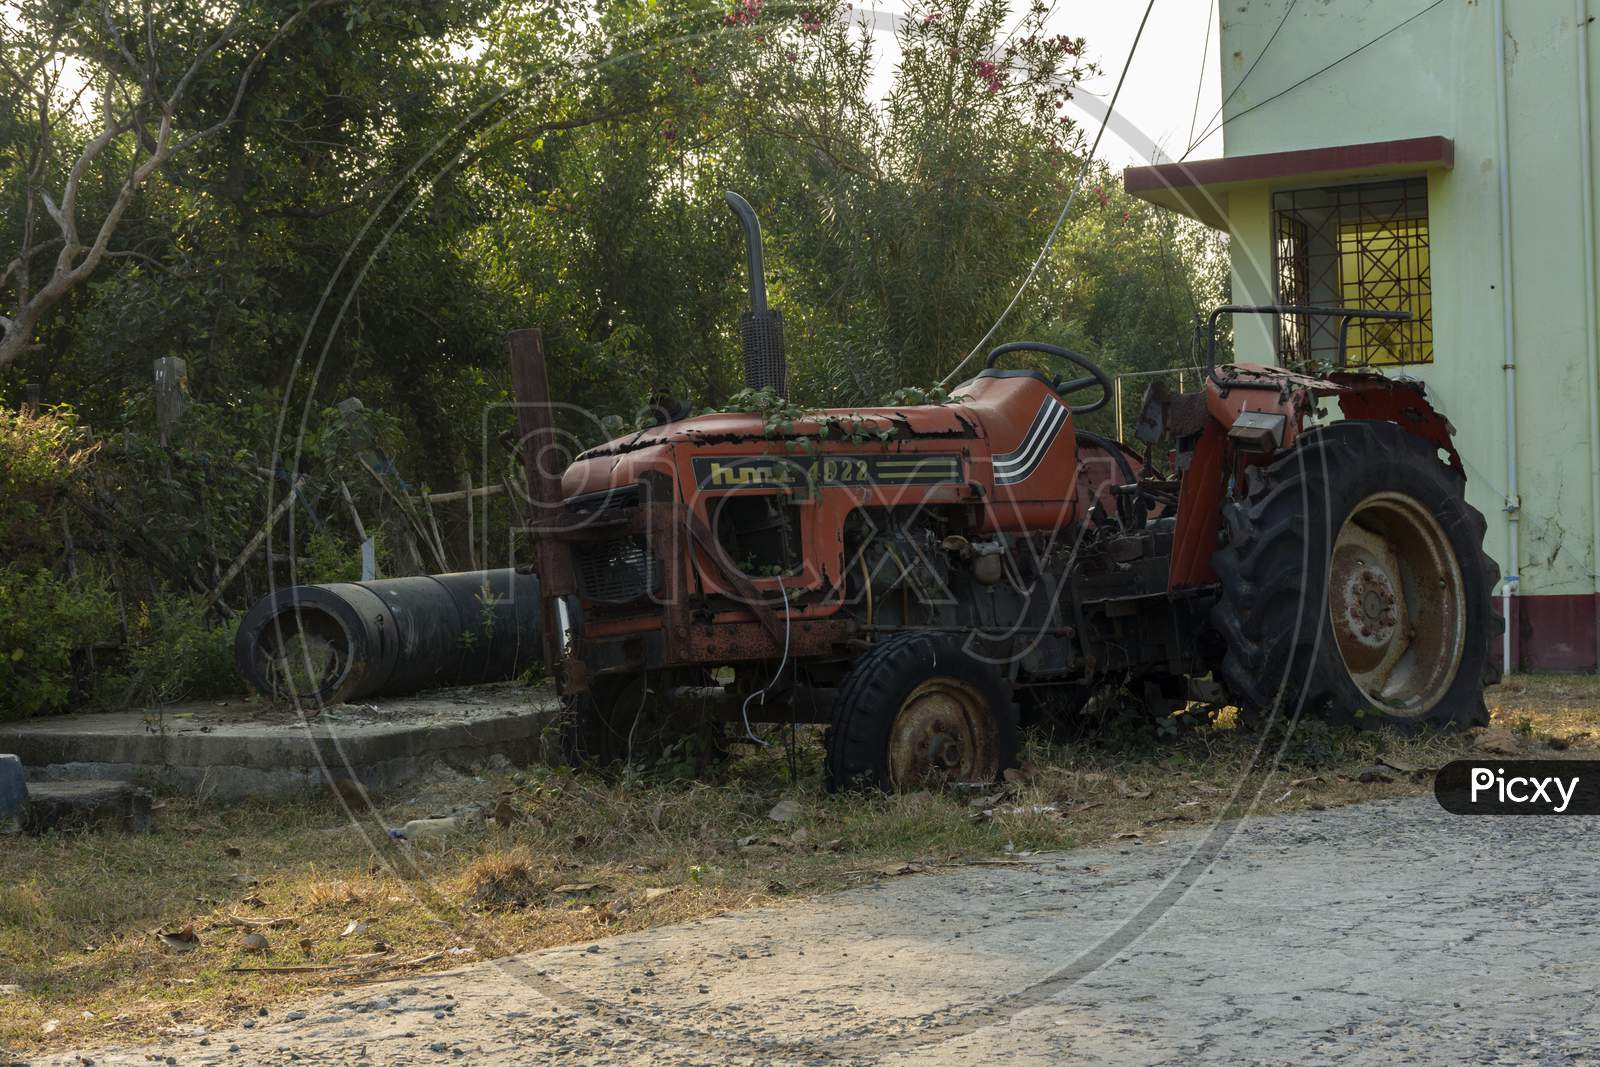 8Th January, 2021, Henry Island, West Bengal, India: An Old Rusty Broken Red Tractor Standing Roadside.